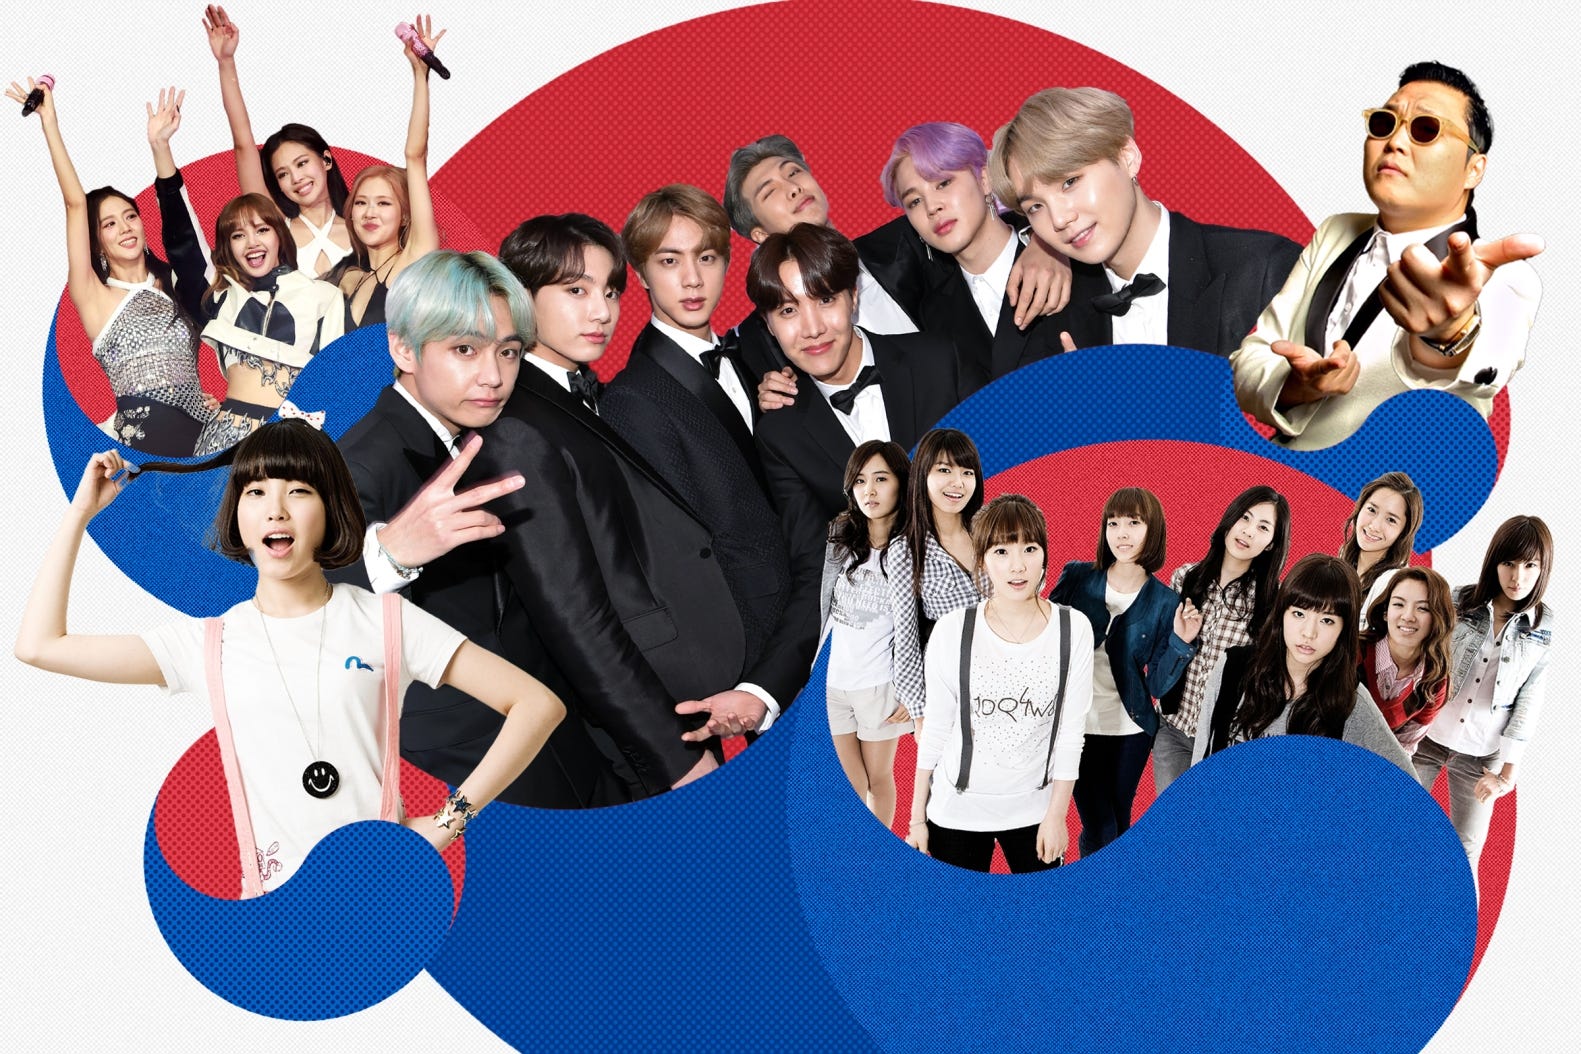 Korean artists overlaid with images of the Korean flag